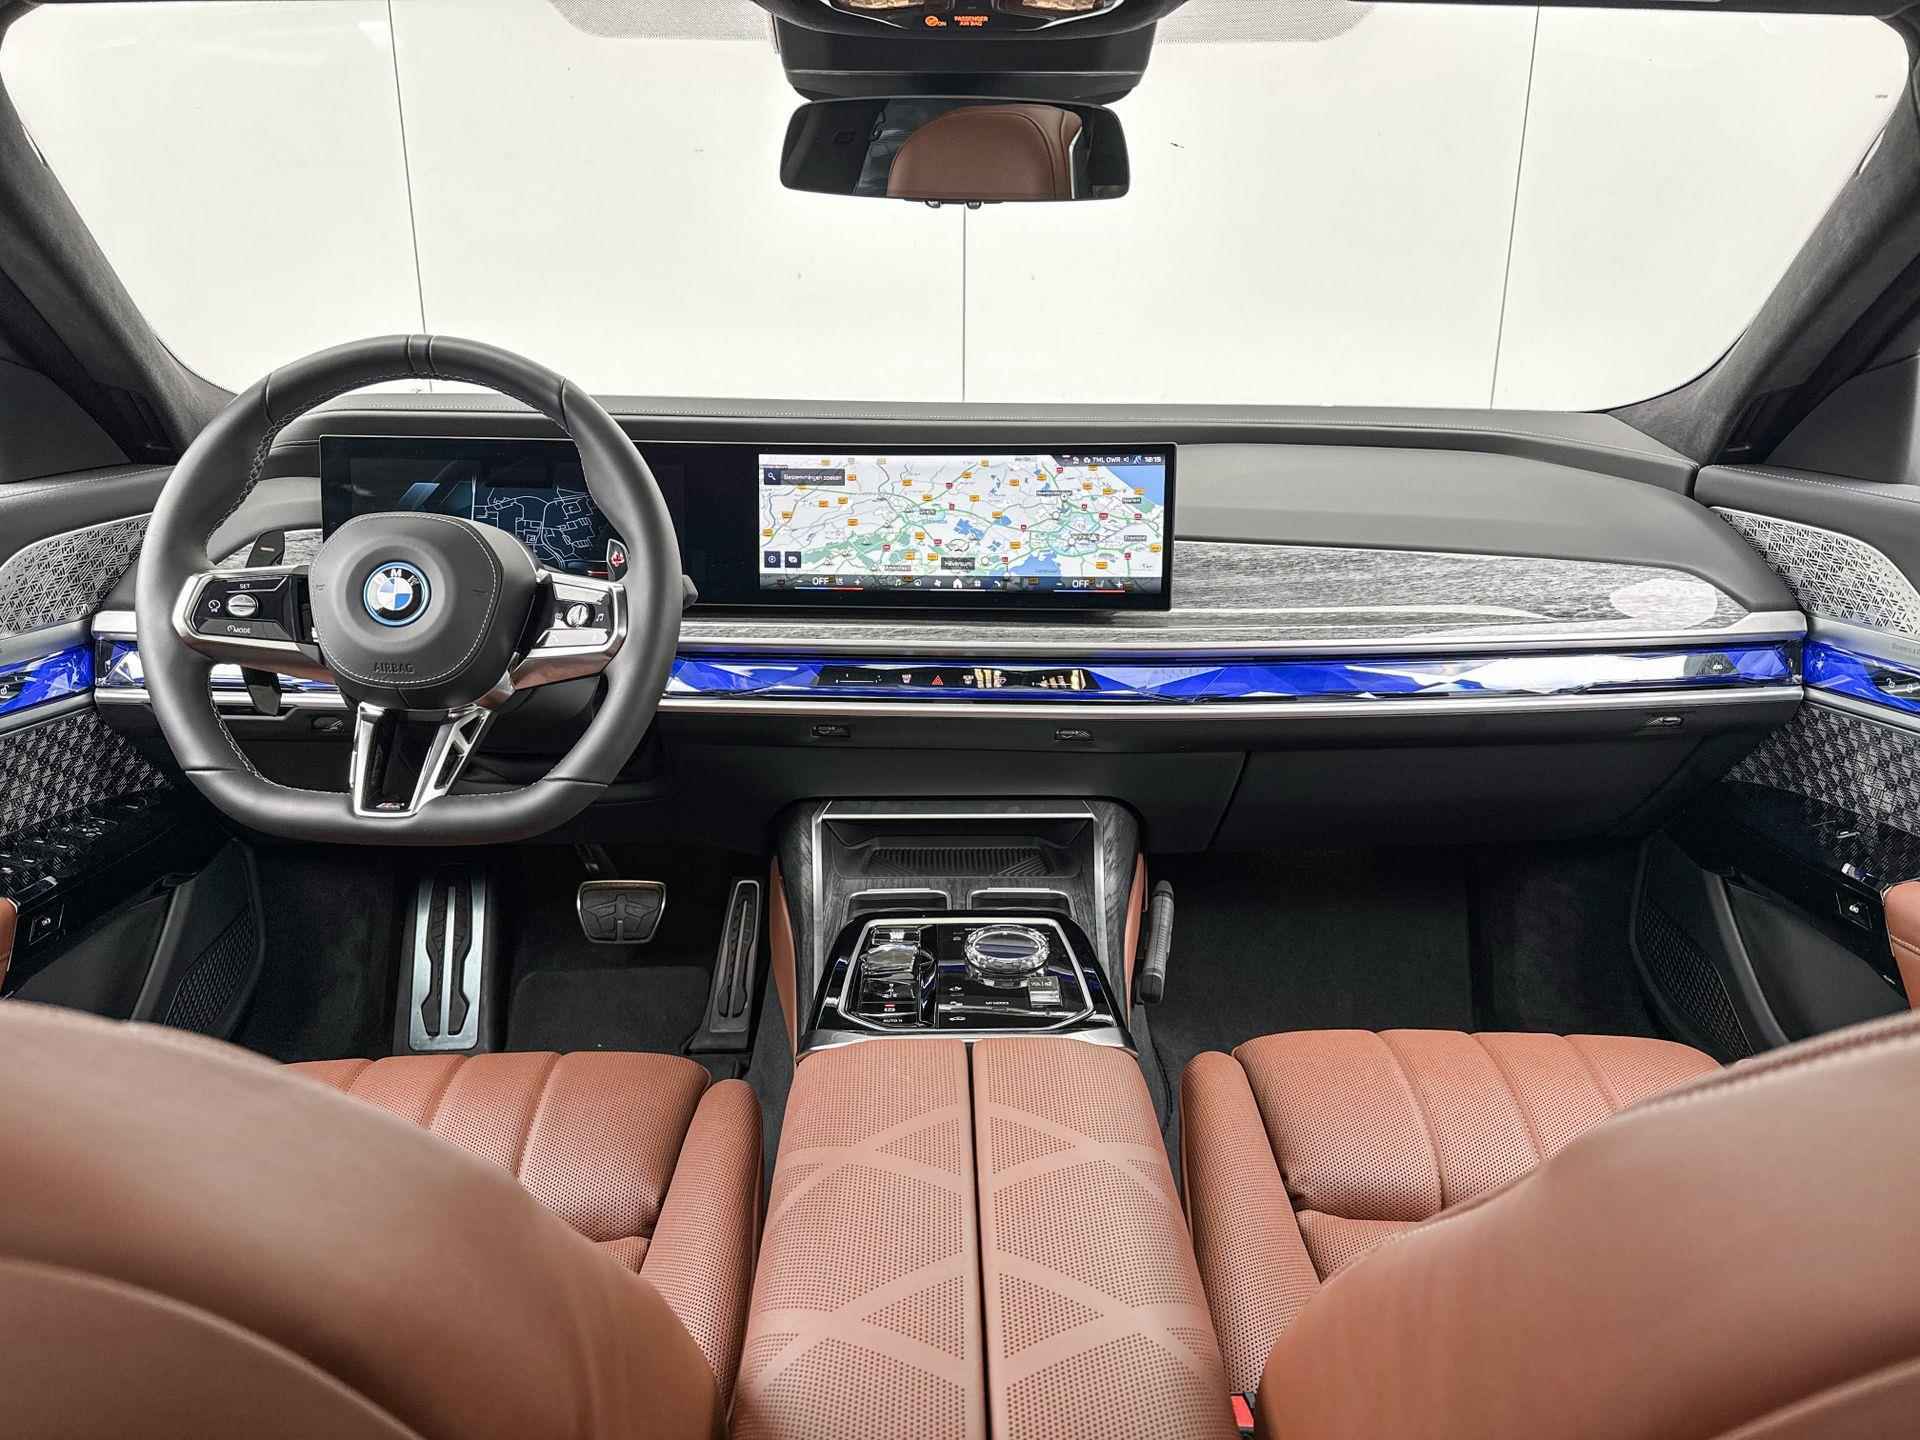 BMW 7 Serie M760e xDrive Bowers & Wilkins Diamond / Executive Lounge / Executive Pack / Performance Pack / Connoisseur Pack / Climate Acoustics Pack / Iconic Glow / Elektrische portieren / CraftedClarity - 11/27